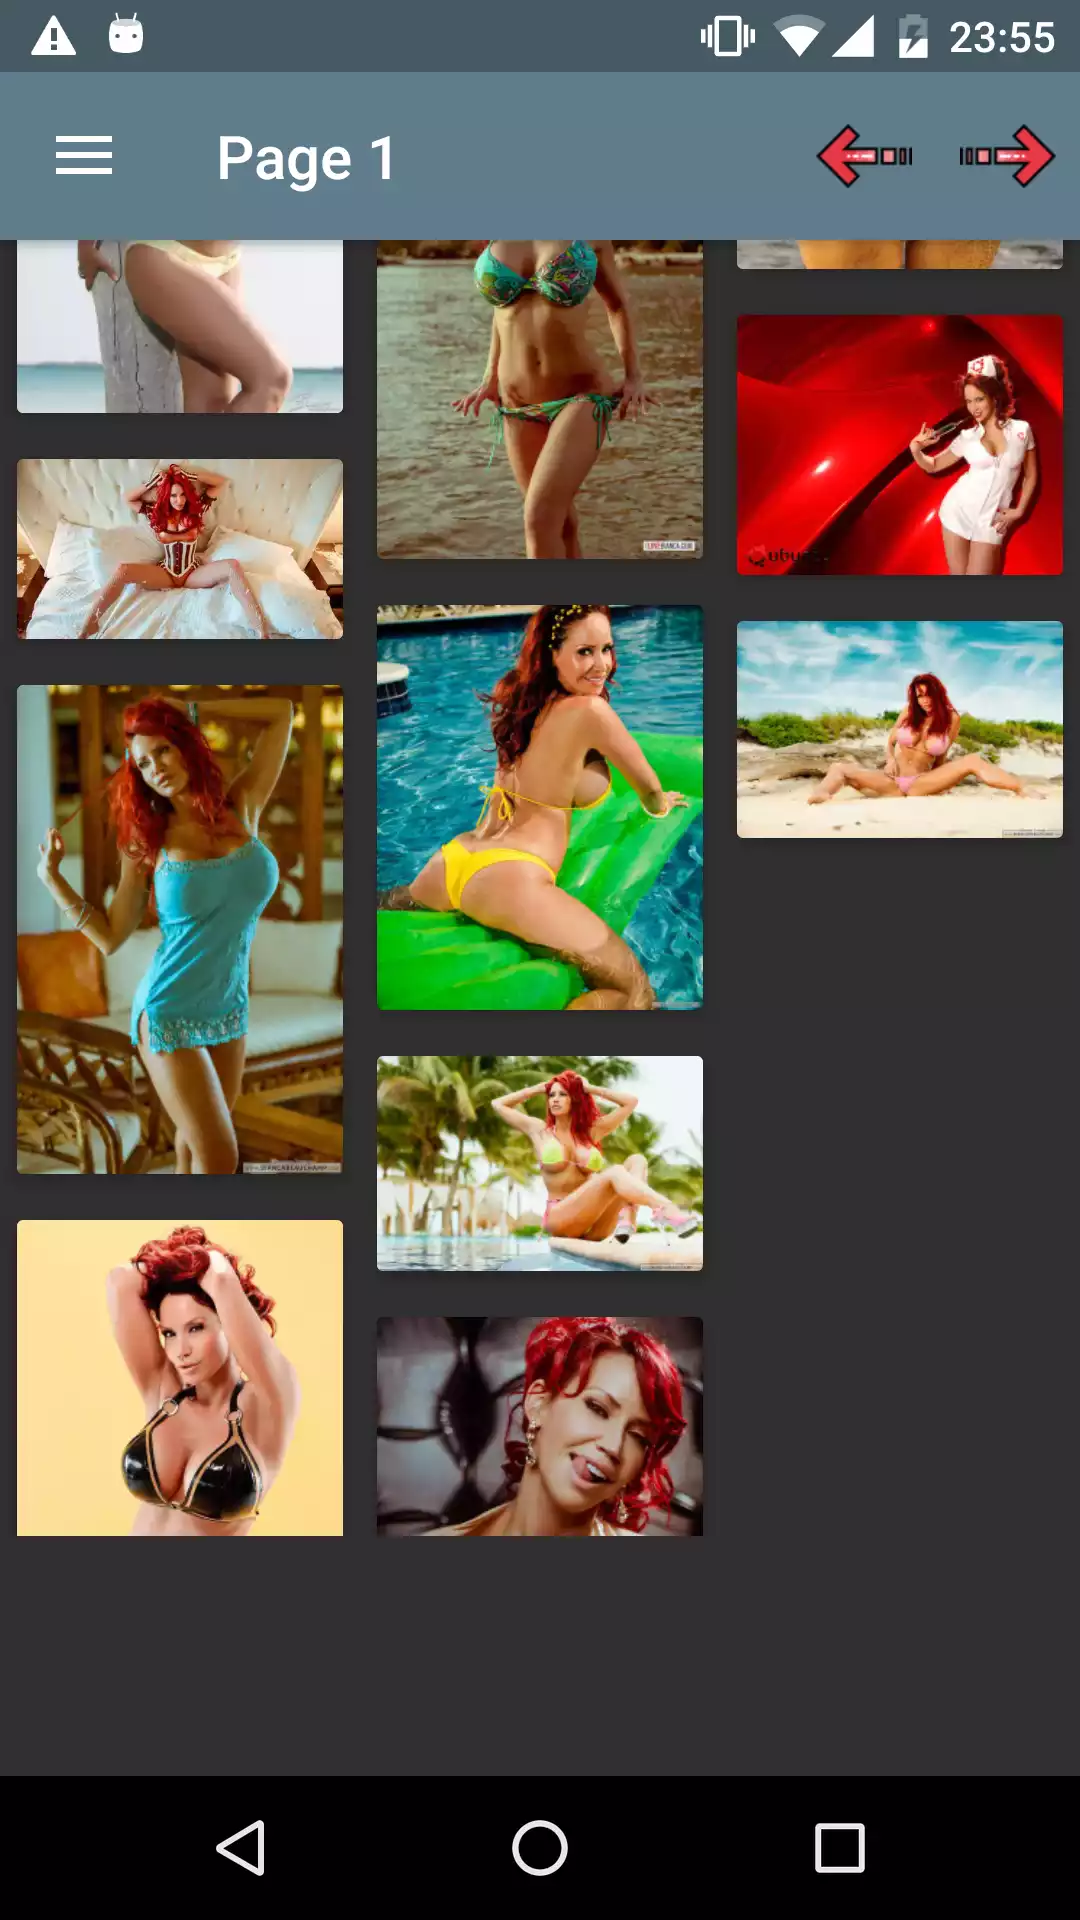 Bianca Beauchamp editor,hentai,andriod,wallpapers,sexy,best,photo,download,backgrounds,pornstar,gallery,adult,sex,erotic,anime,porn,strapon,apk,pictures,apps,app,sexygalleries,updates,manga